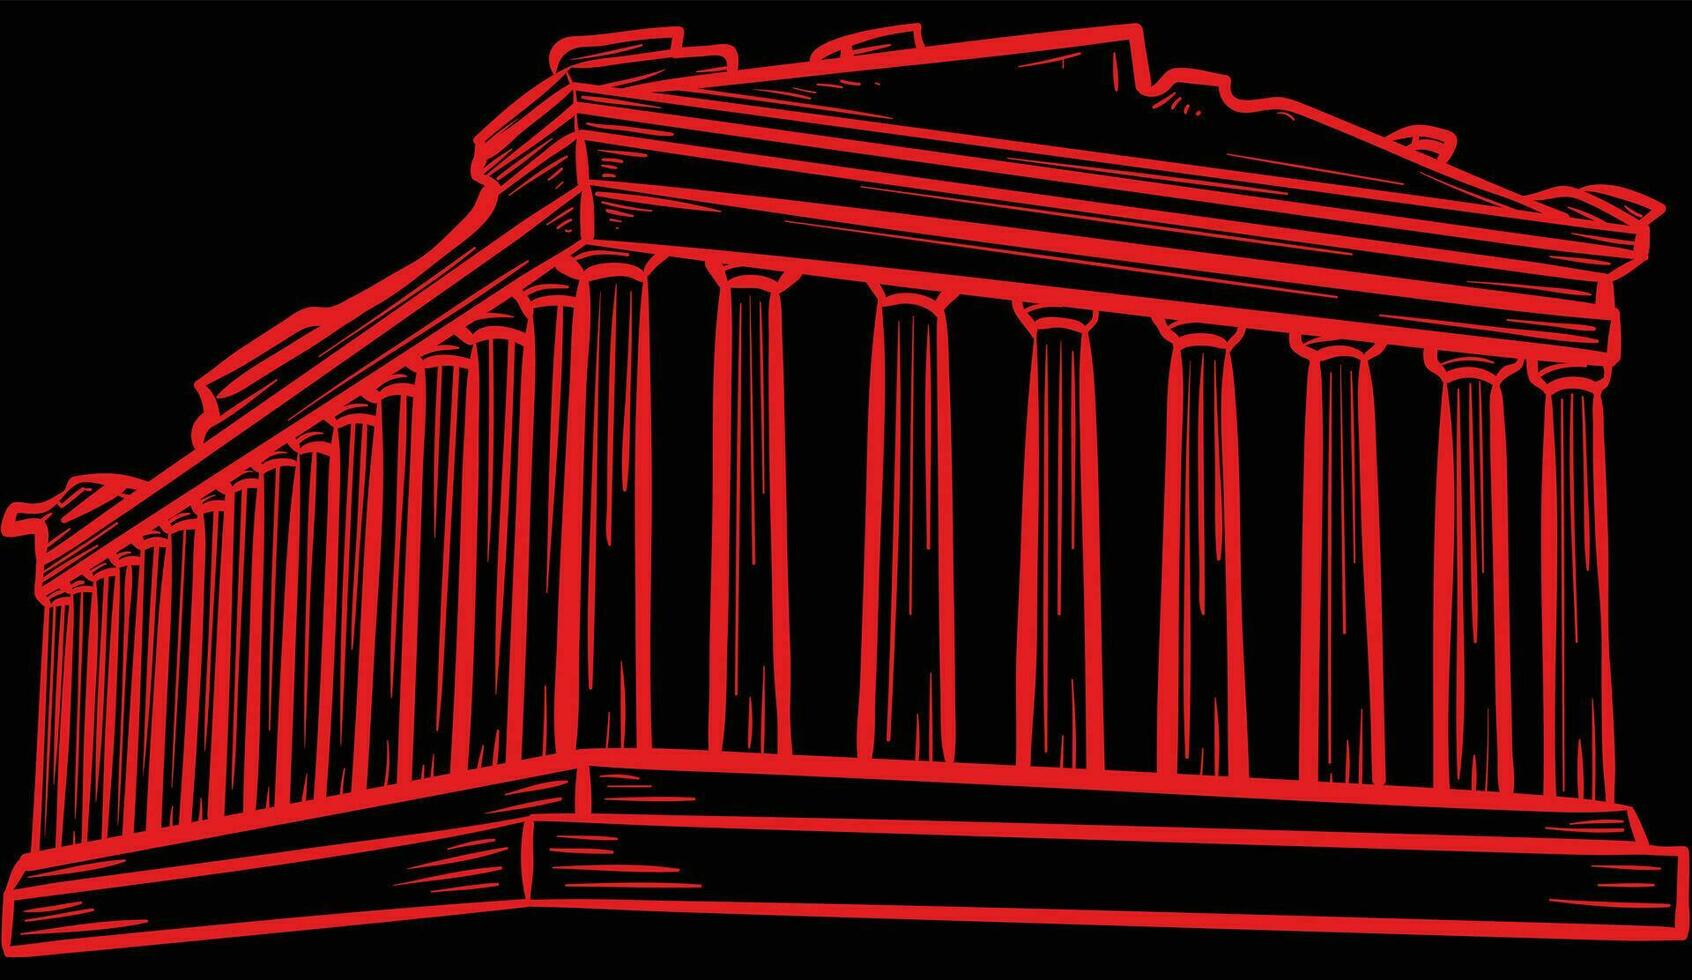 Acropolis of Athens illustration vector